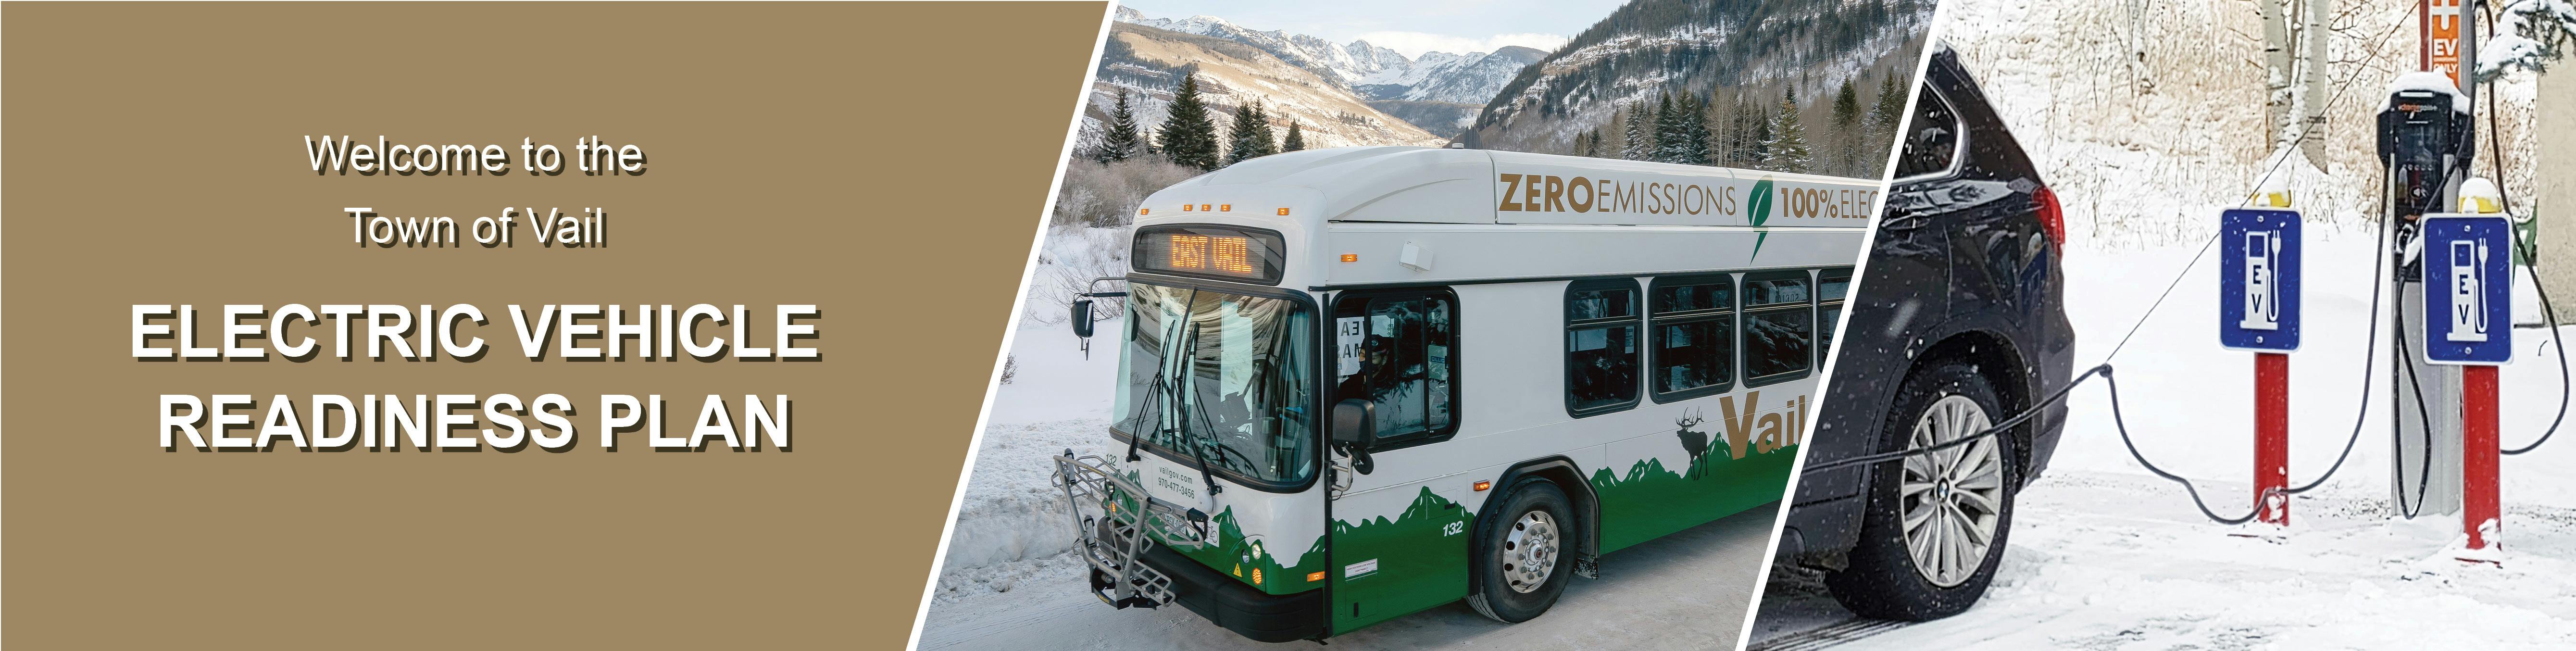 Electric Vehicle Readiness Plan Engage Vail